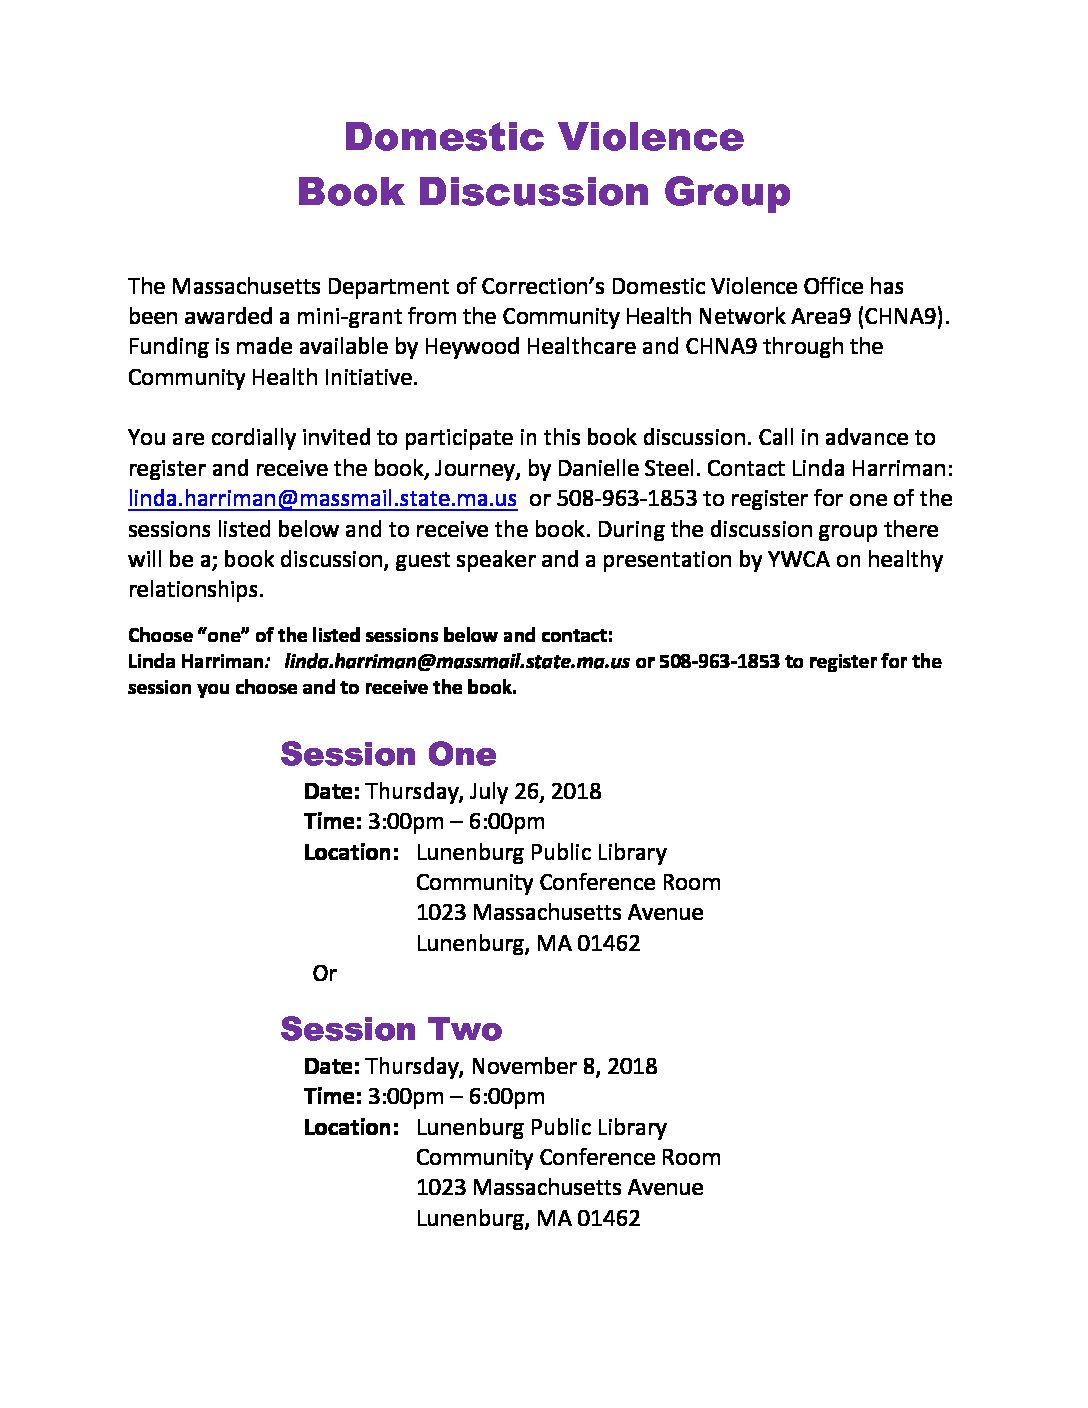 Domestic Violence Book Discussion Group Session One